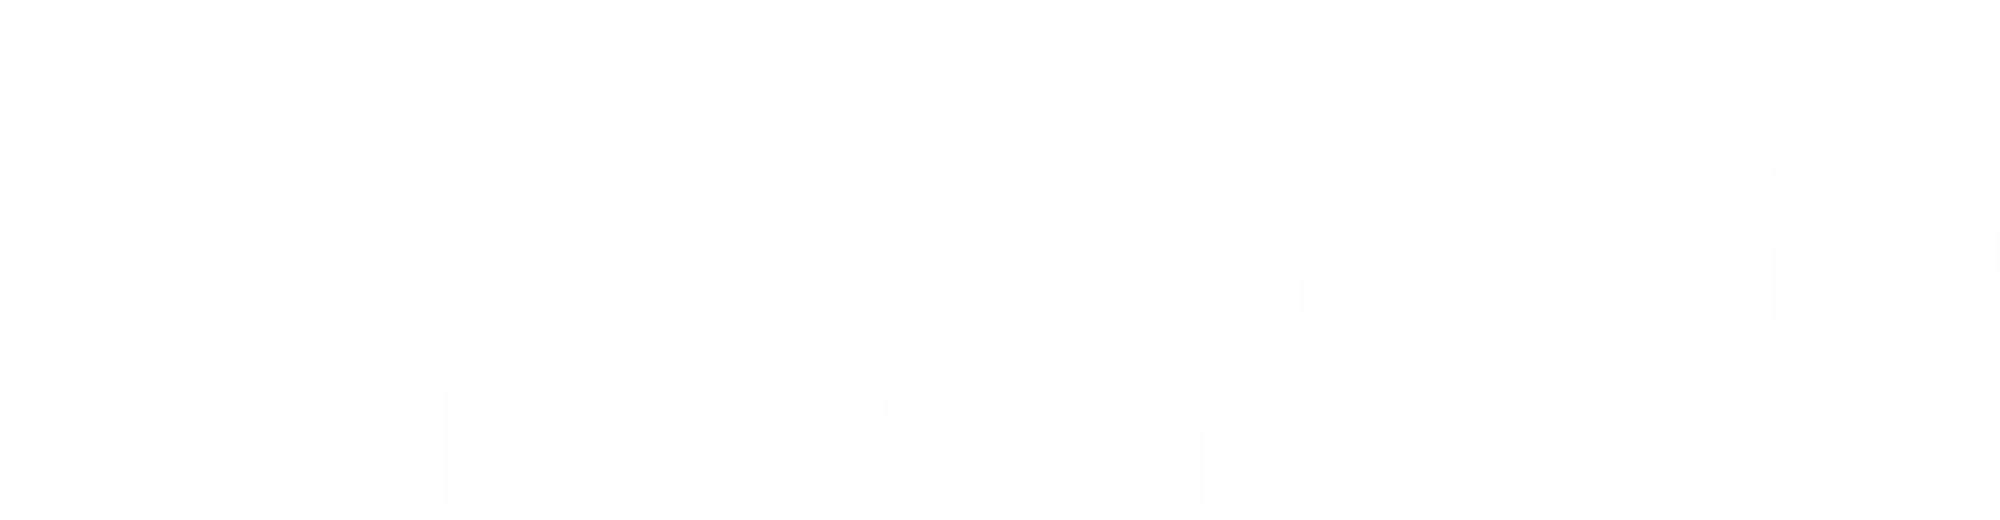 Georgetown Church of the Nazarene.png